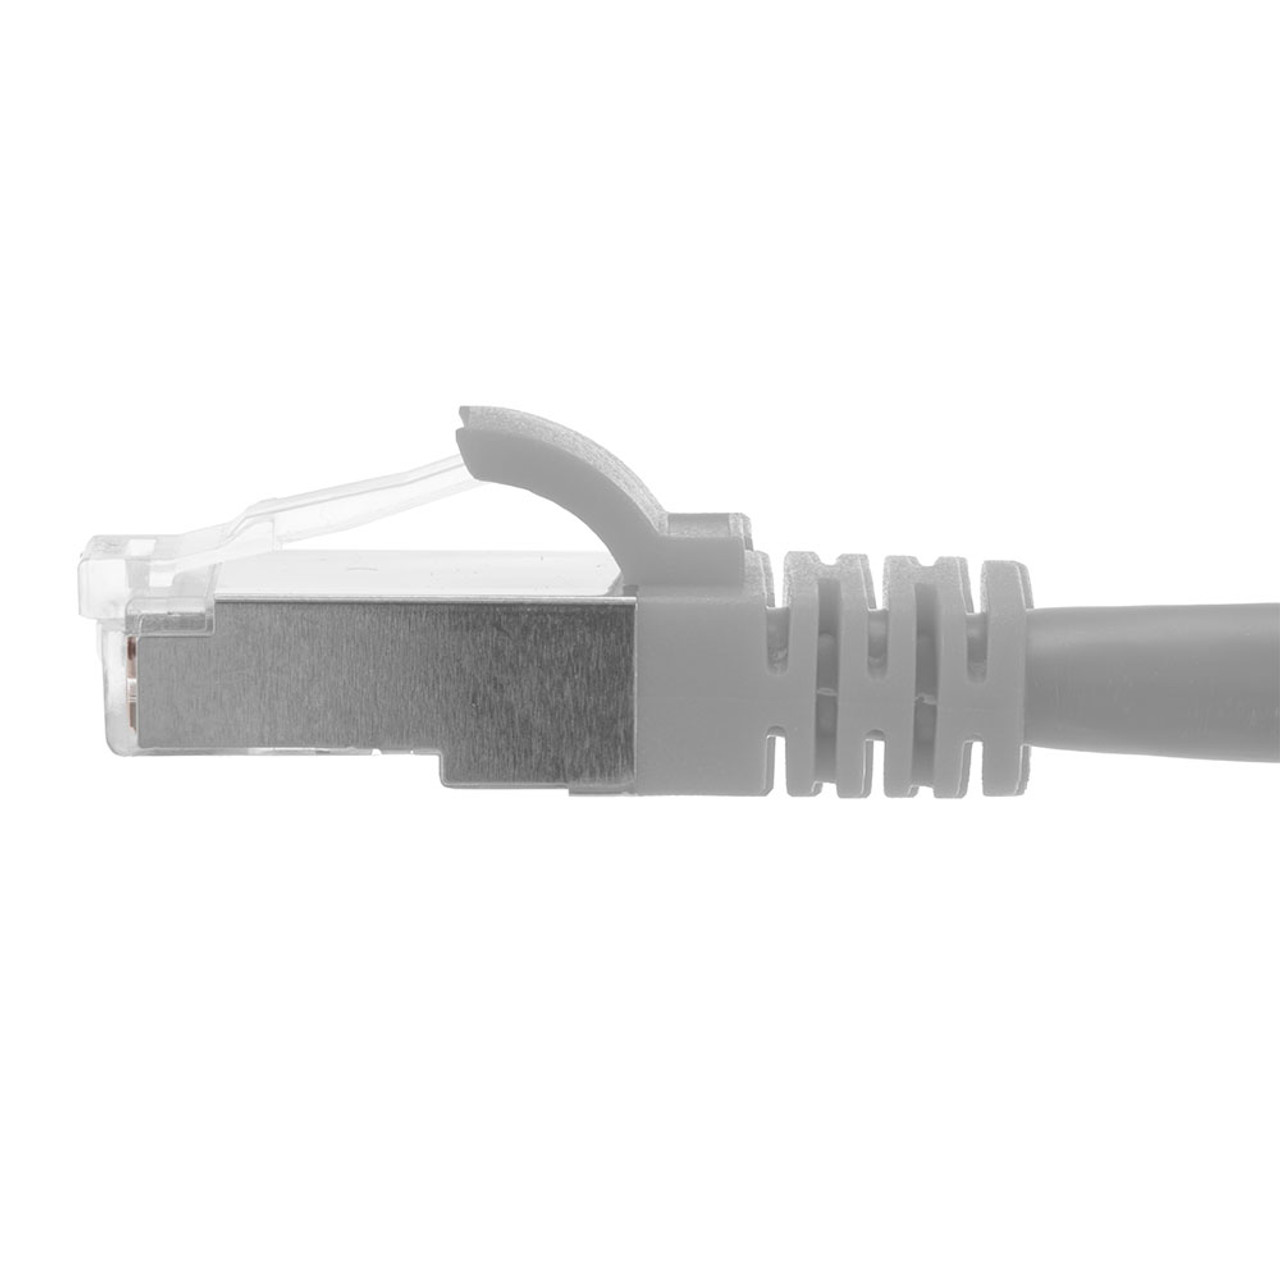 Ethernet Patch Cable CAT6A, S/FTP, 26AWG, 5 Ft,  5 pack, Gray